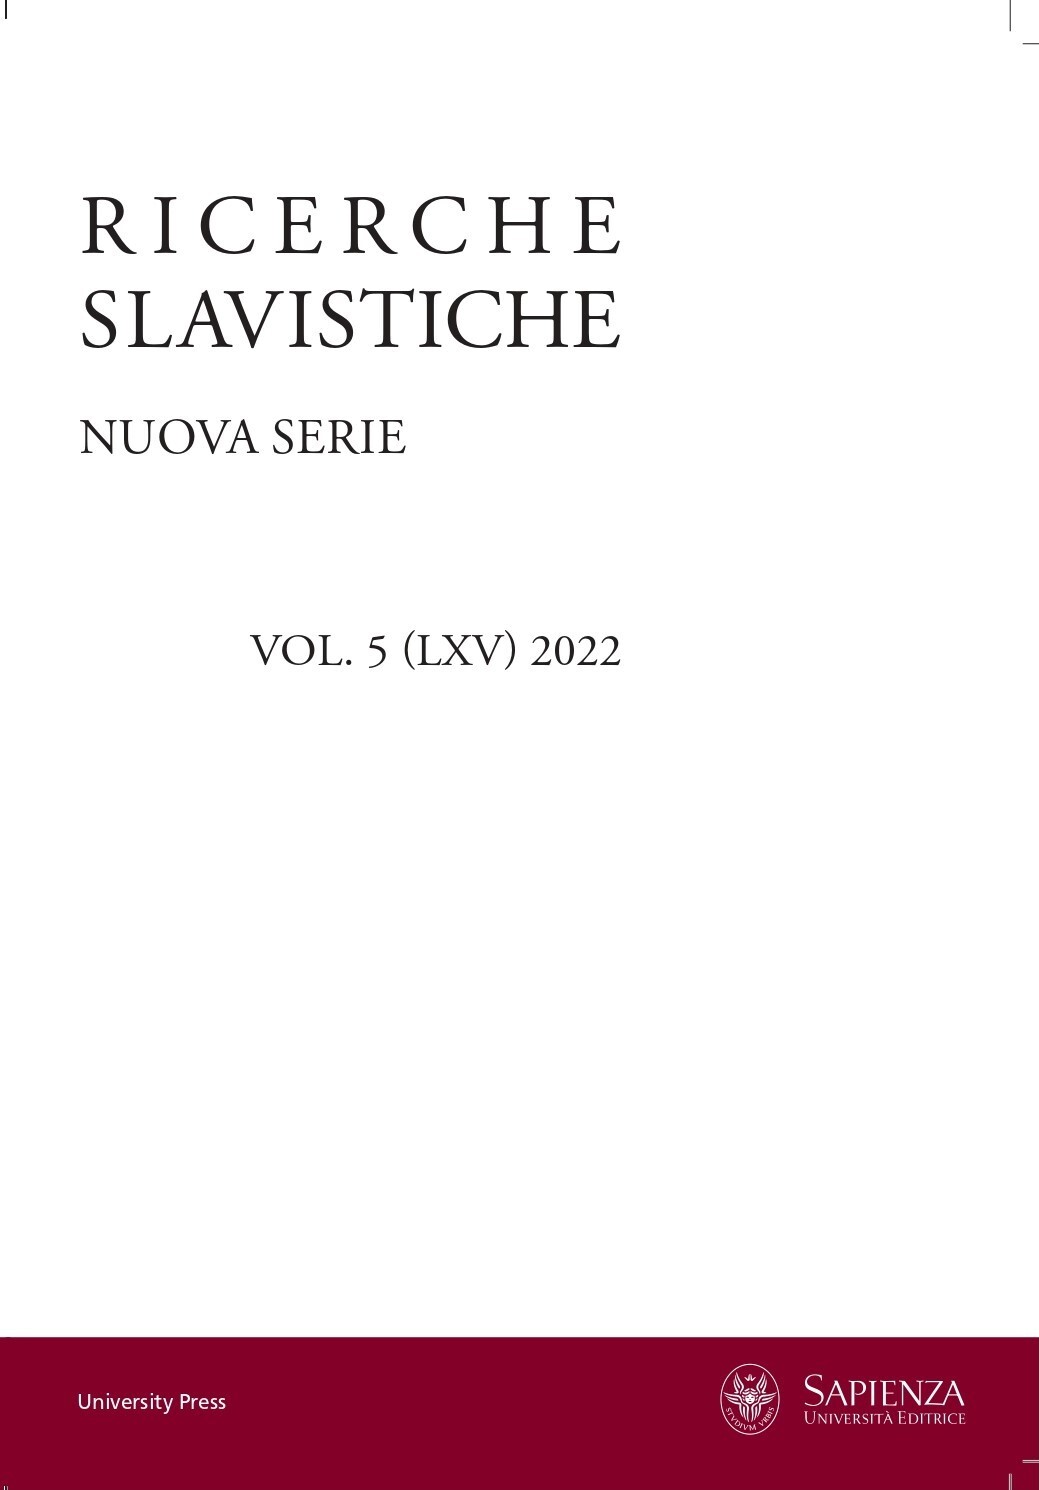 Towards An Introduction to Seventy Years of History of "Ricerche slavistiche" Cover Image